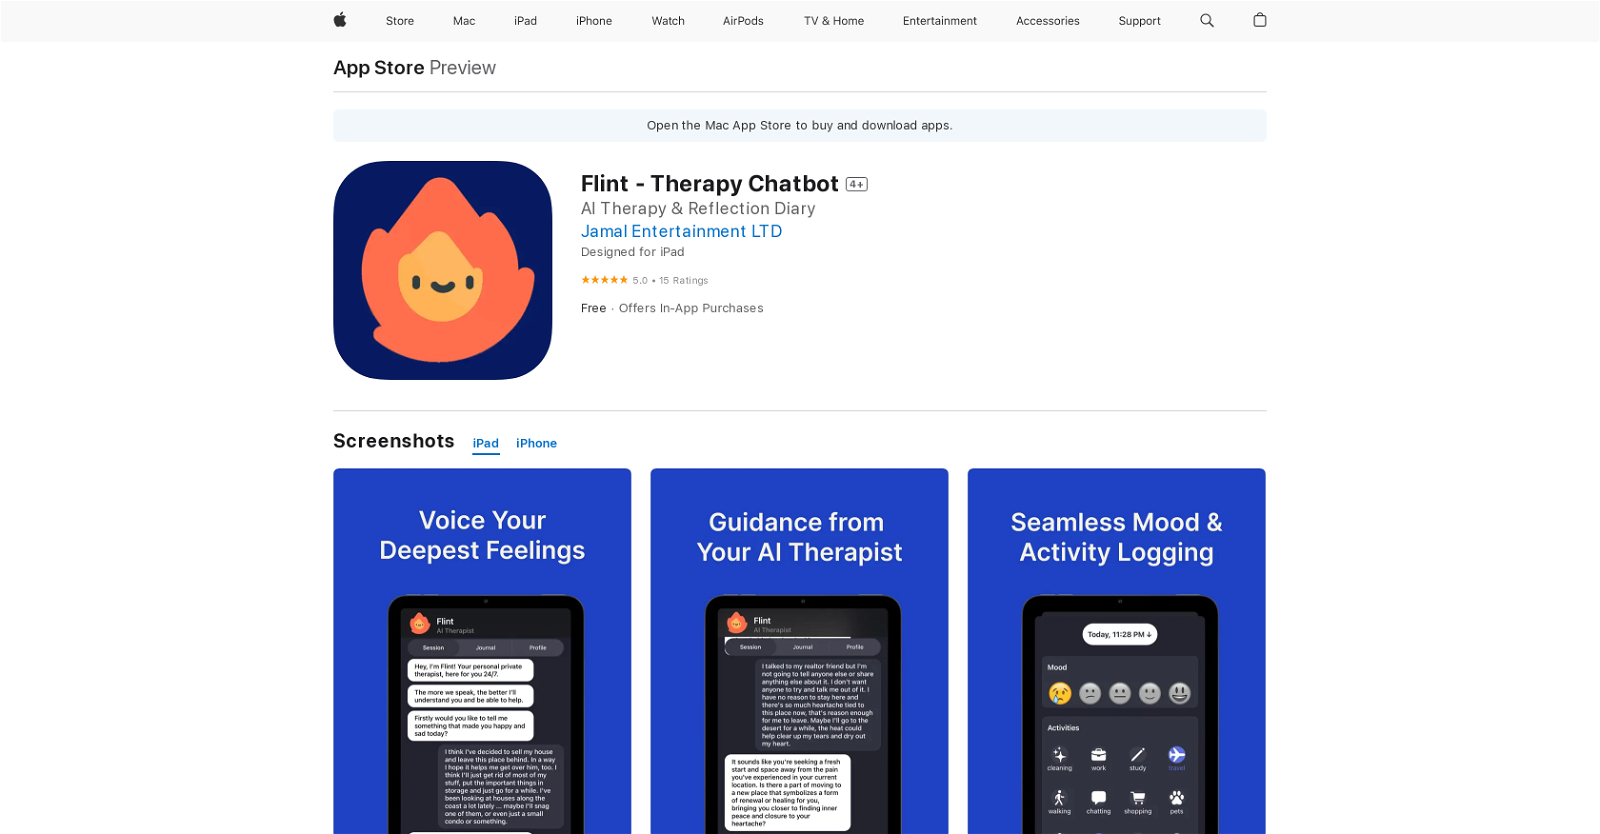 Flint - Therapy Chatbot website